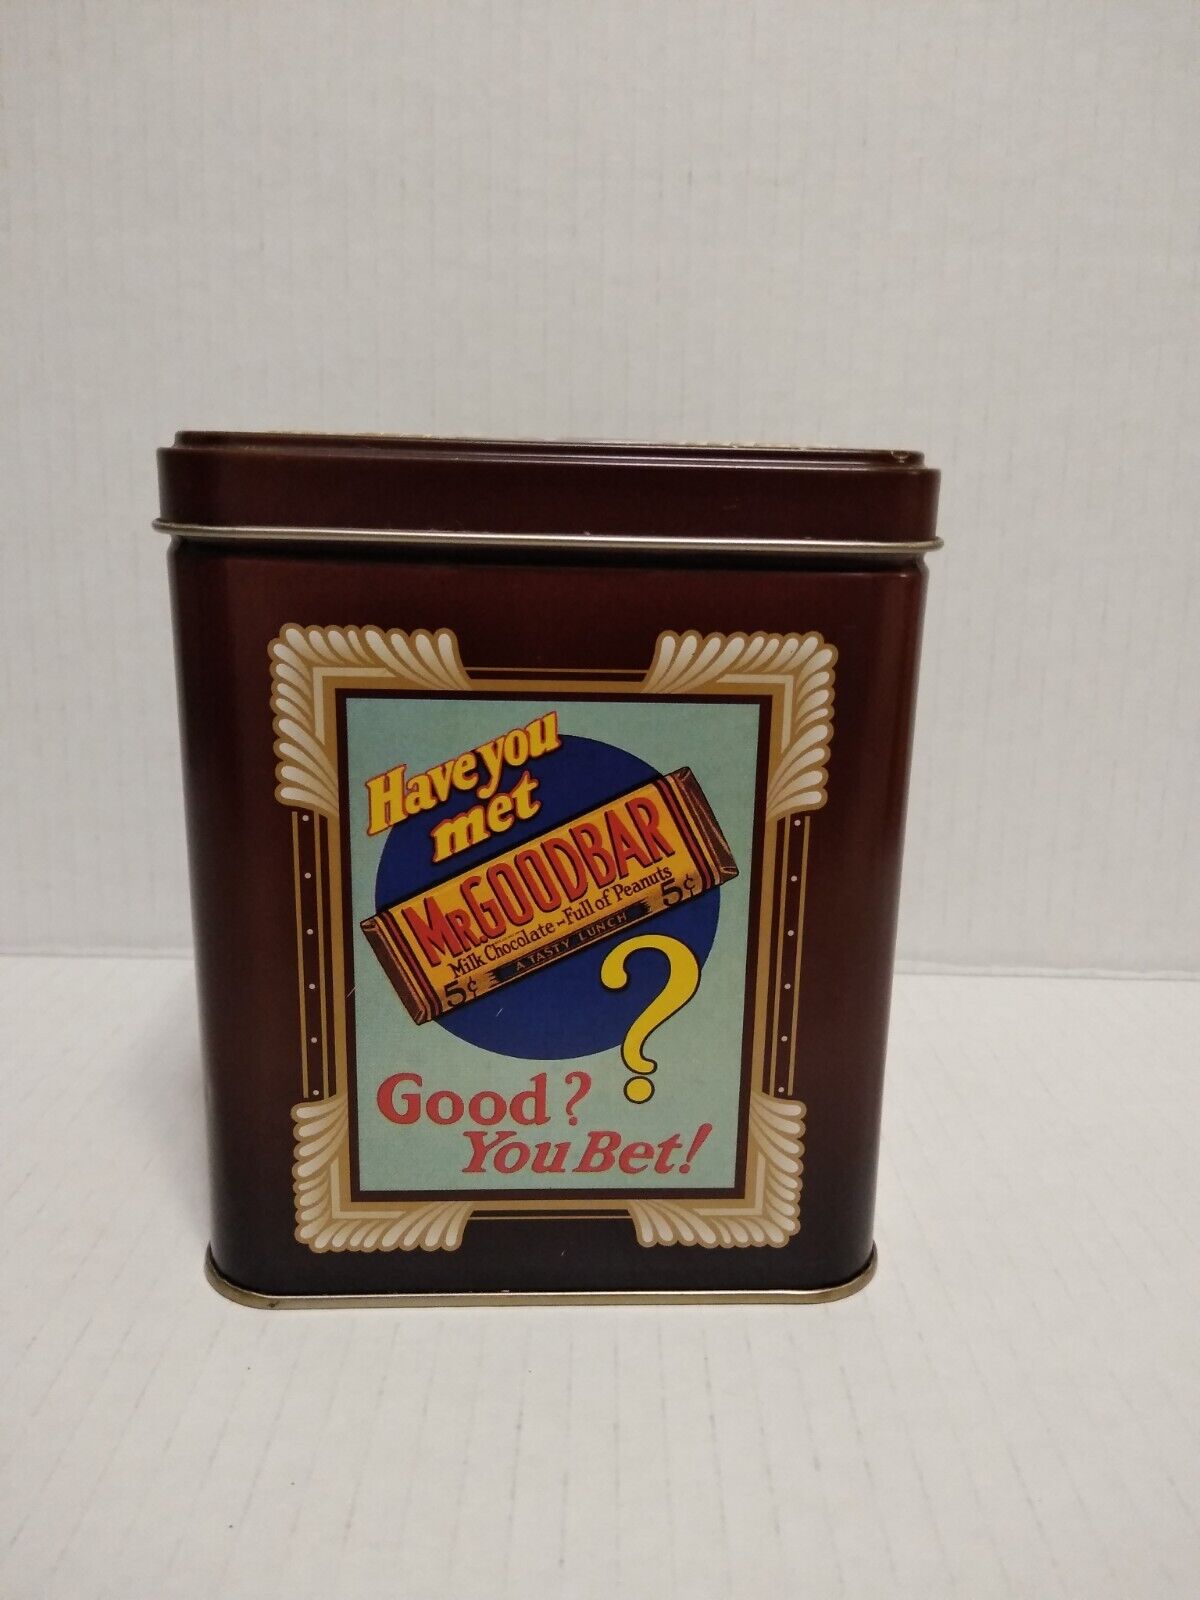 Hershey\'s 1997 Millennium Series Canister #2 Collectible Tin